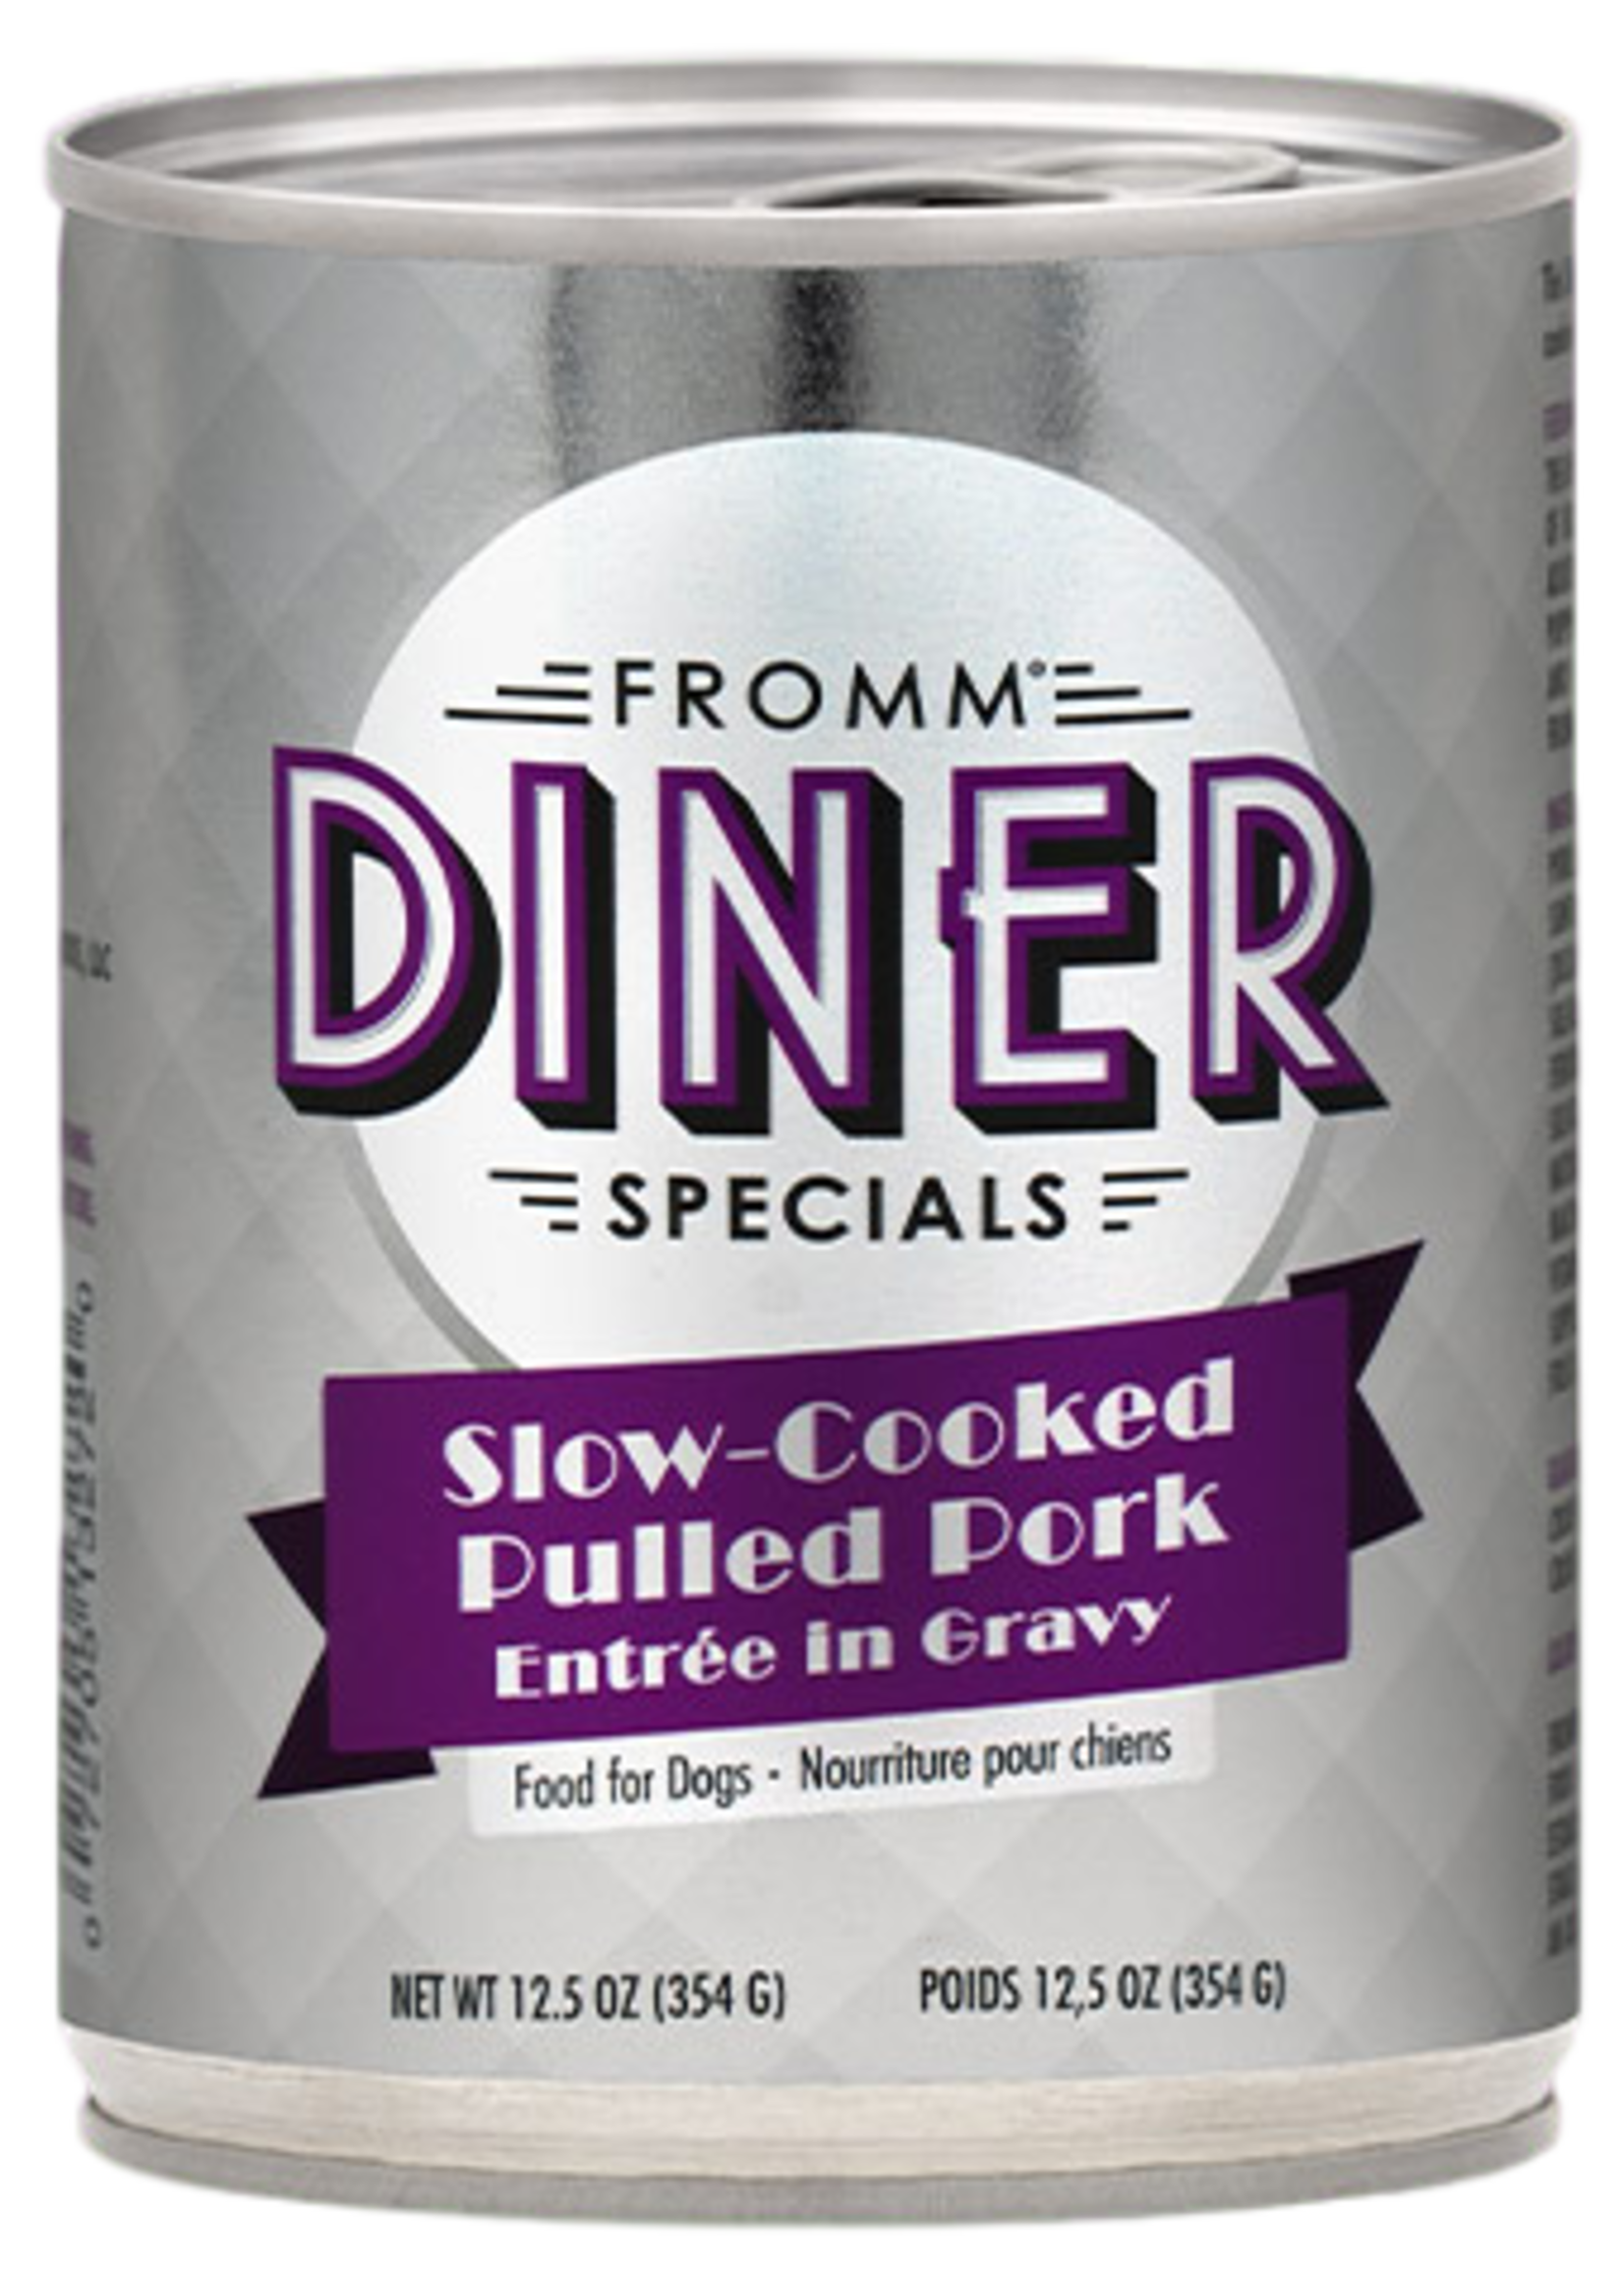 Fromm Family Foods Fromm, Dog, Diner Special, Slow-Cooked Pulled Pork, 12.5oz